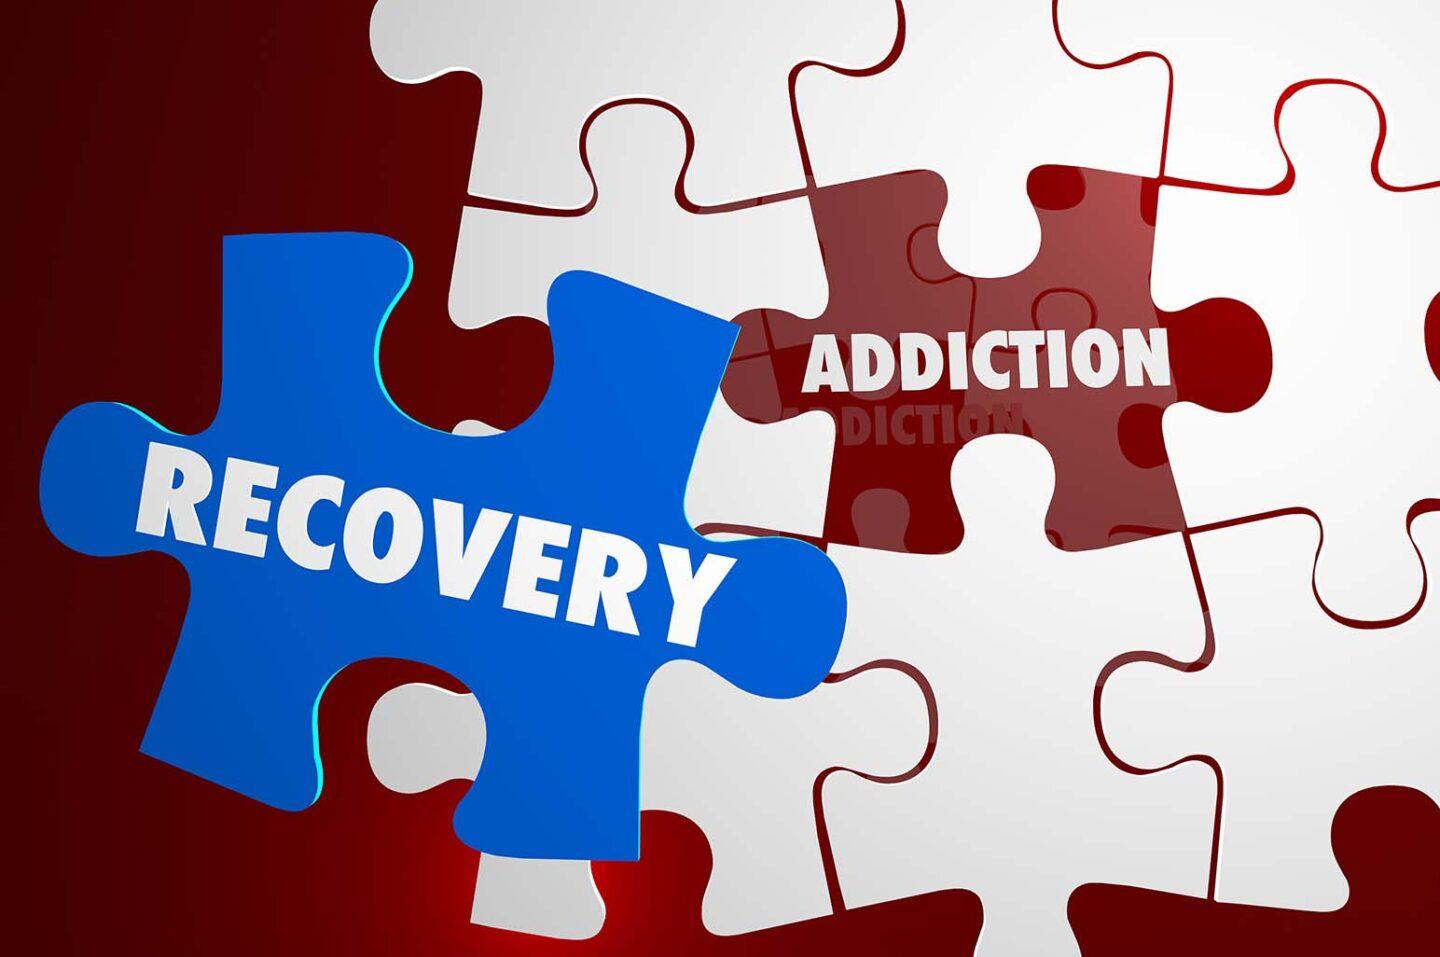 Addiction Recovery